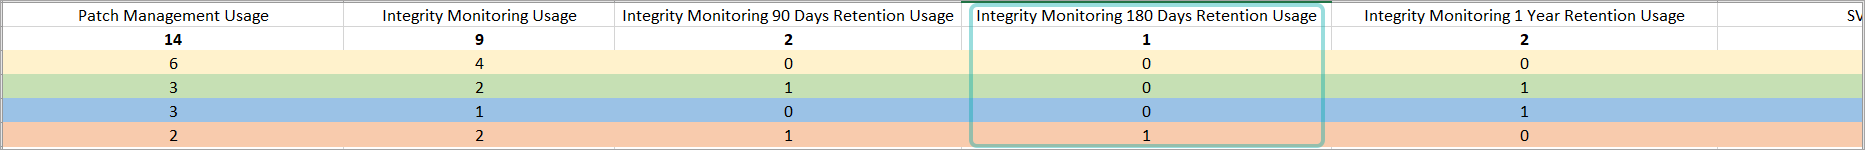 monthly__integritymonitoring_180days_usage_340181_en.png